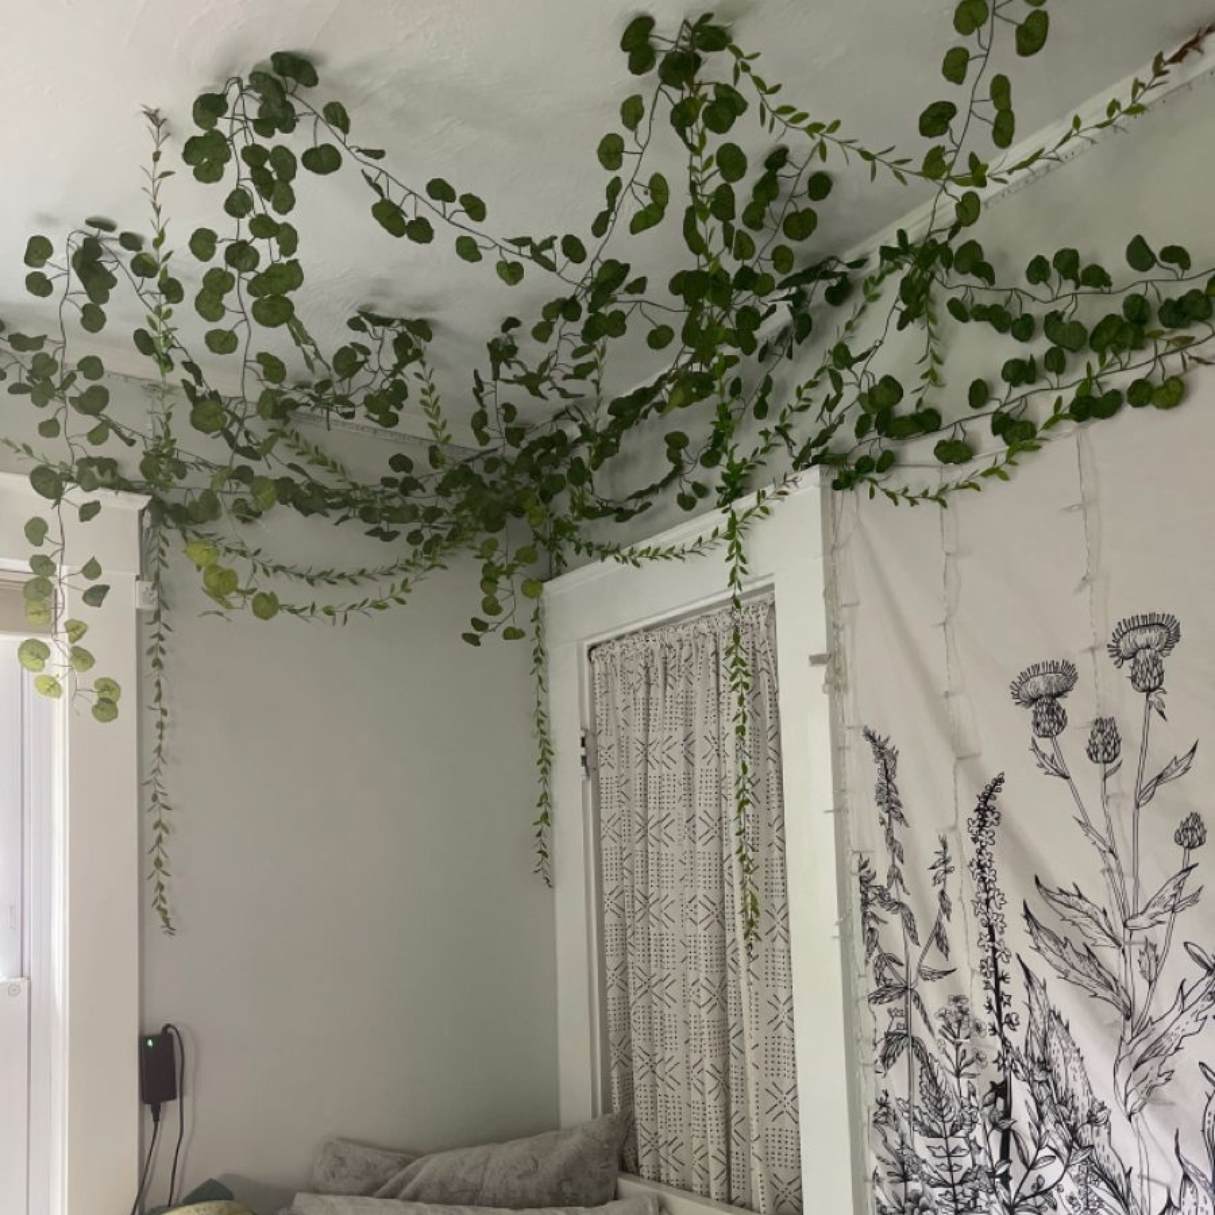 How To Hang Vines From The Ceiling Storables